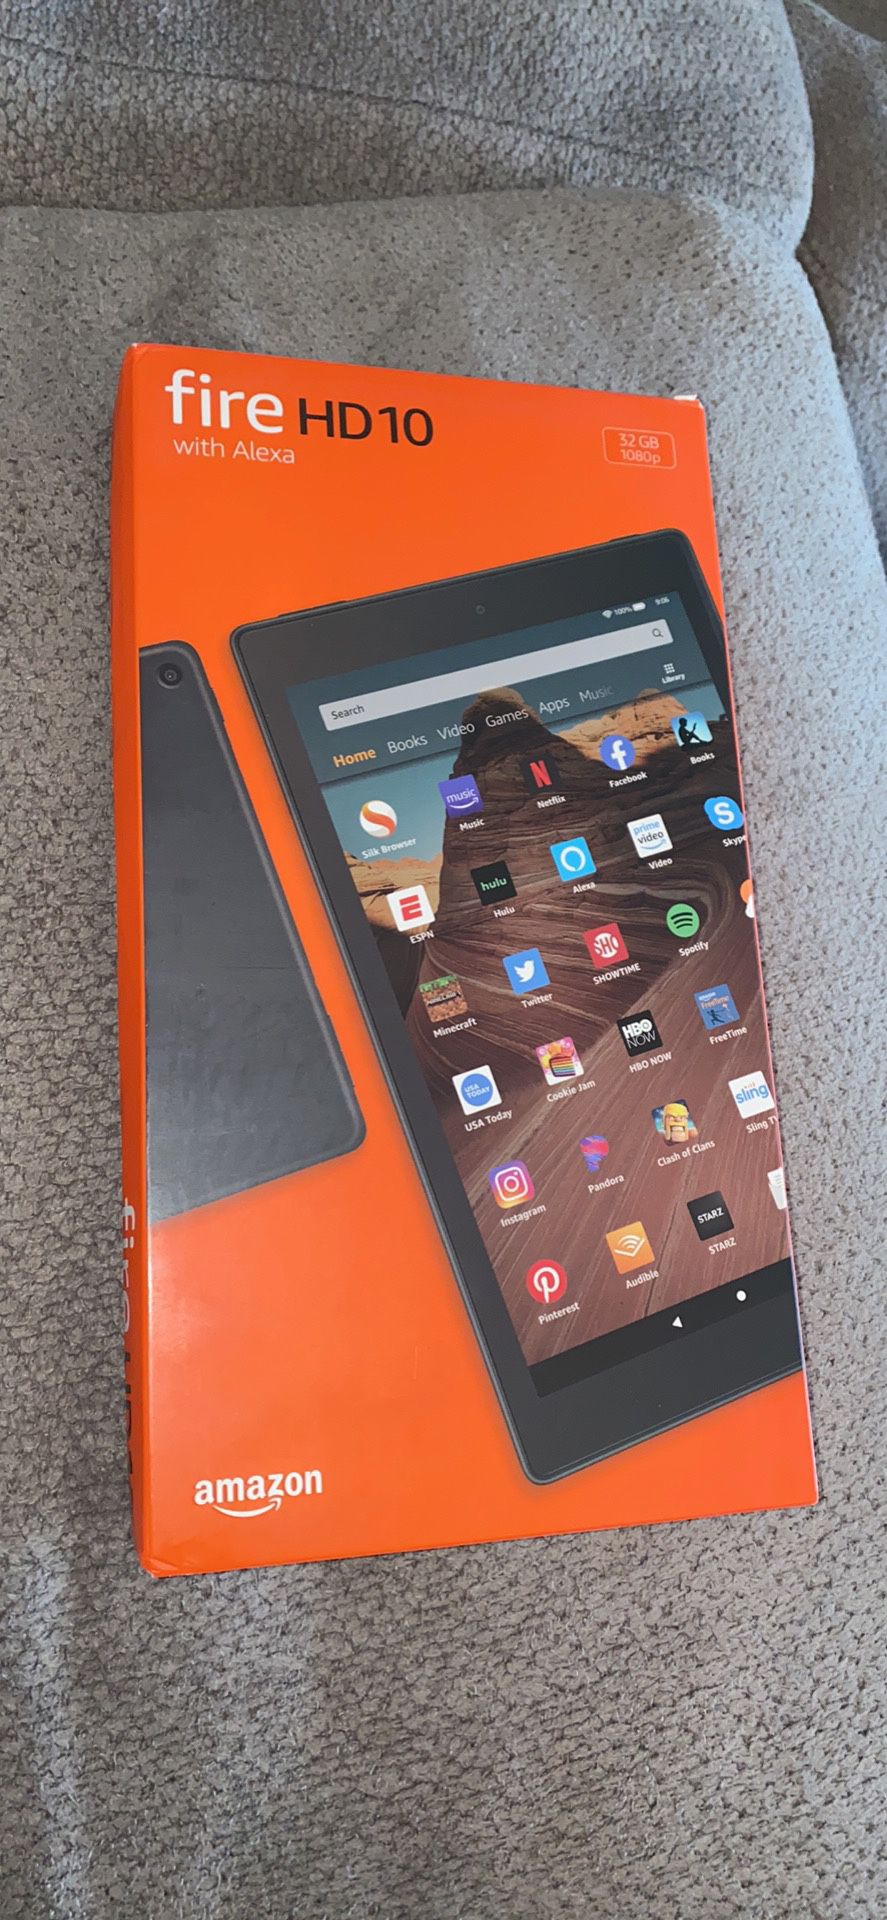 Amazon Fire HD 10” Tablet 32 GB w/ Special Offers